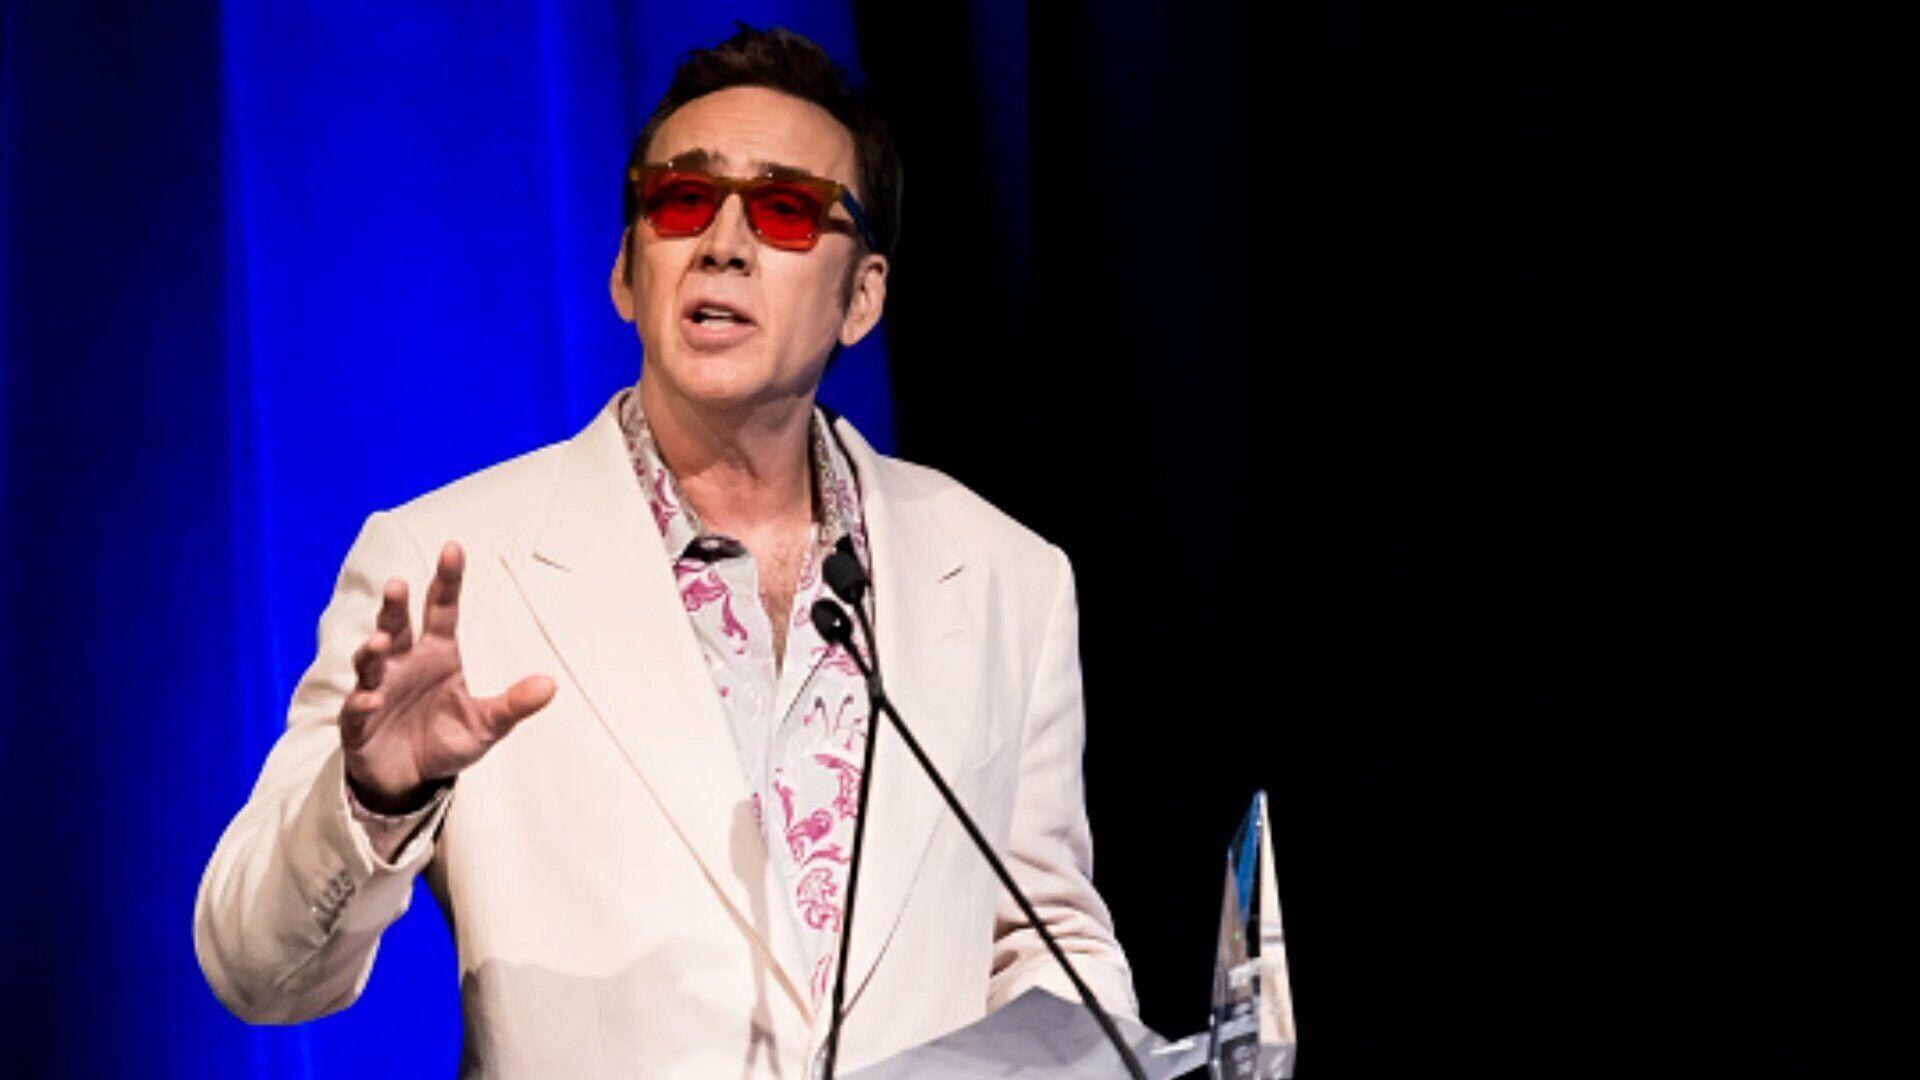 Nicolas Cage pulls out of film festival amid actors' strike